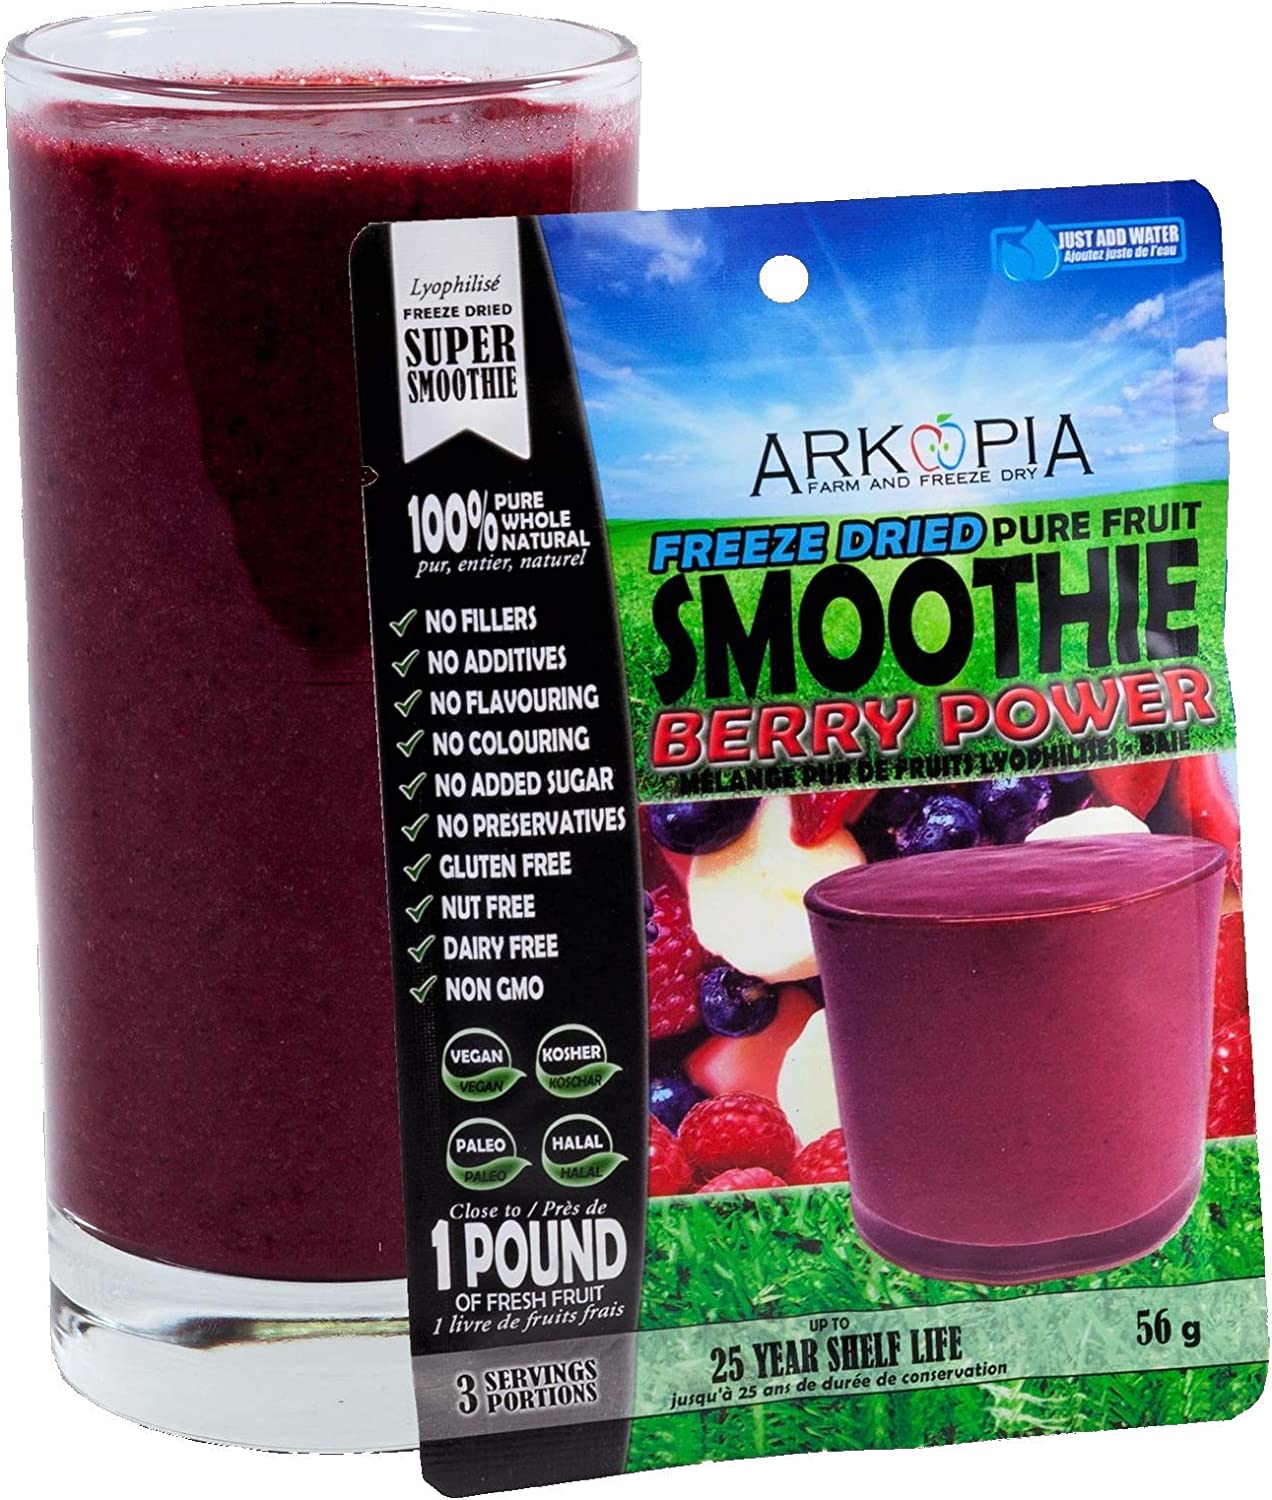 Arkopia Freeze Dried Pure Fruit Smoothie Berry Power 56g (Discontinued by Inside U)